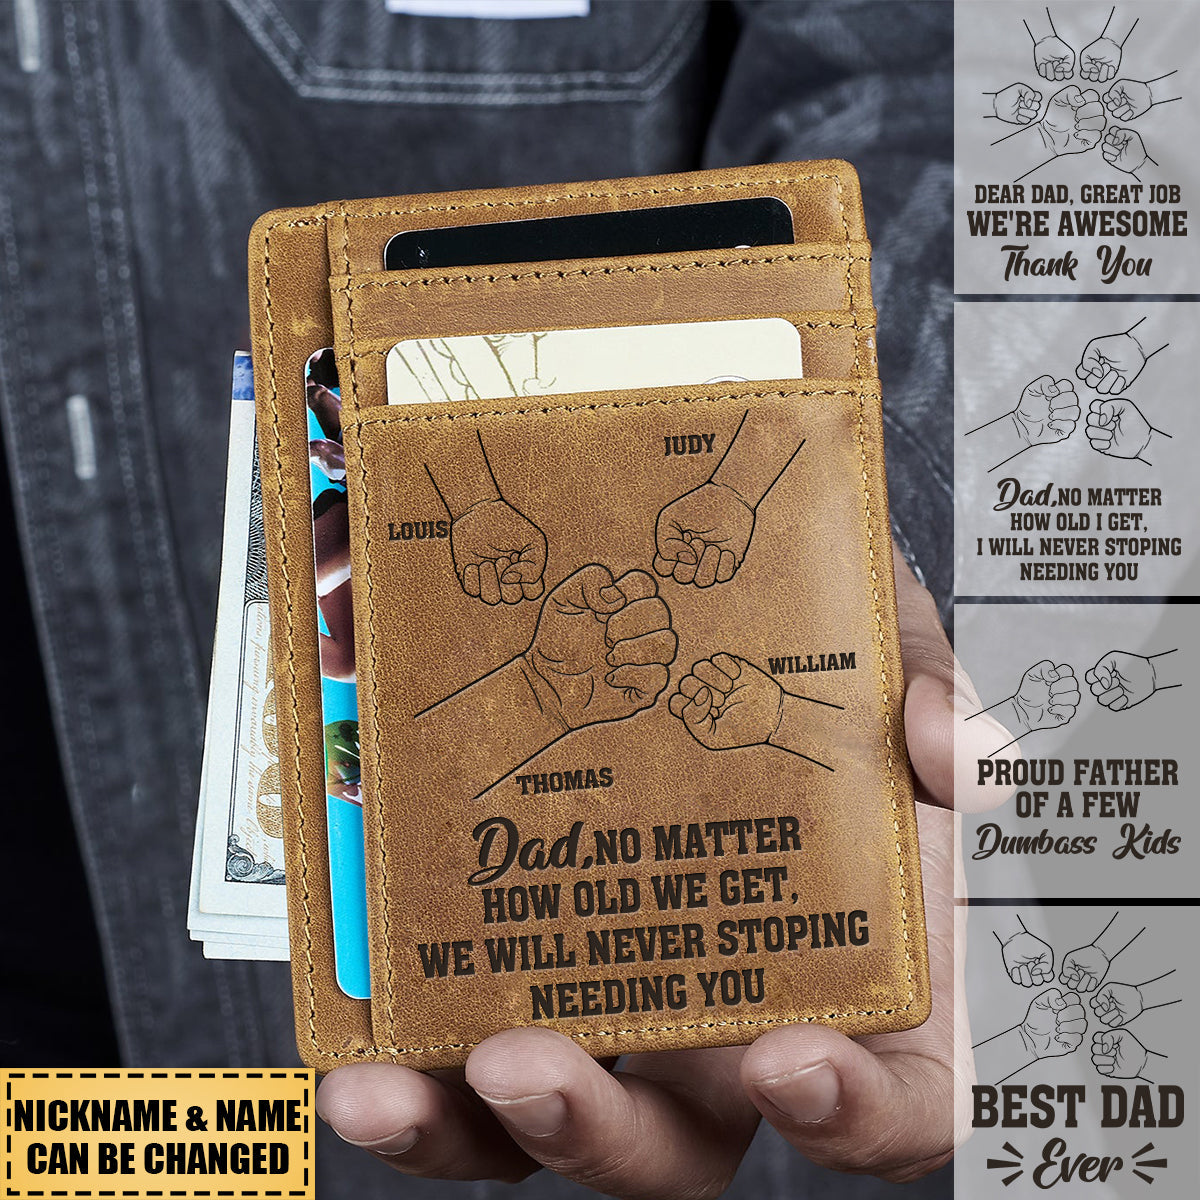 Dear Dad Great Job We're Awesome Thank You - Gift For Dad, Father, Grandpa - Personalized Card Wallet